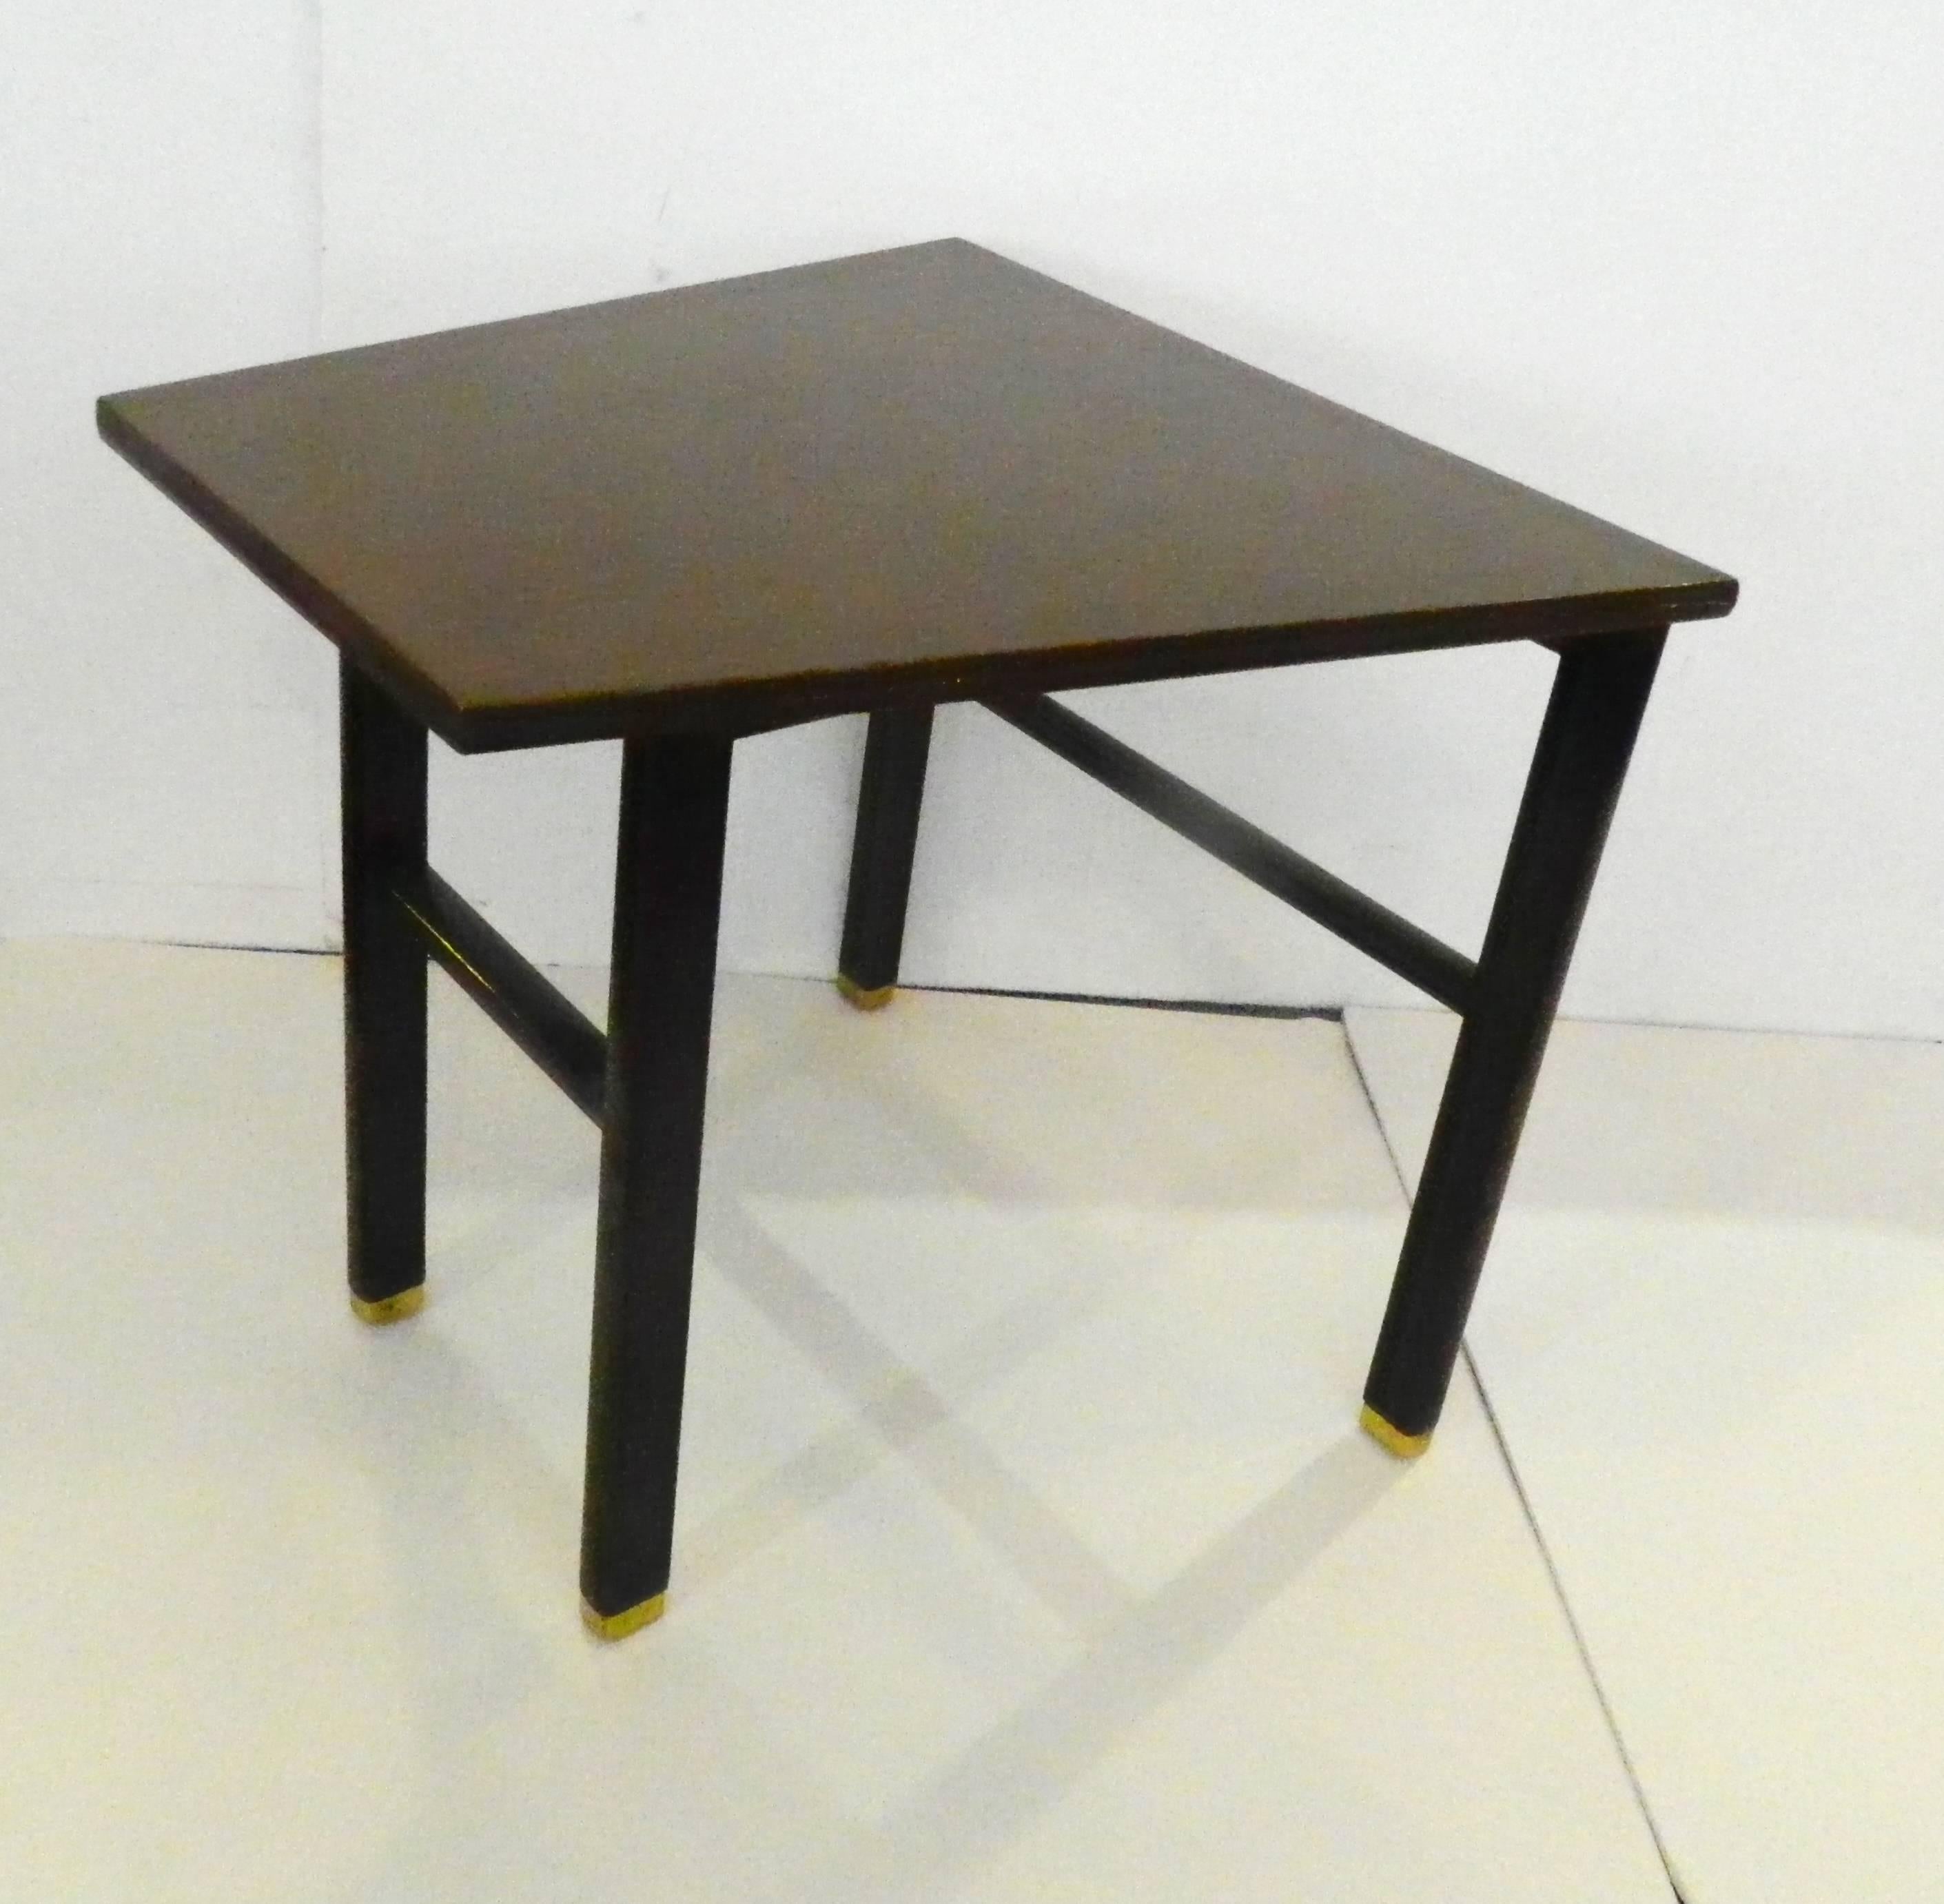 Modern Wedge occasional table designed by Wormley for Dunbar in a trapezoidal shape with brass capped legs. 
The back is 24" wide and tapers to 14". Metal Dunbar label.